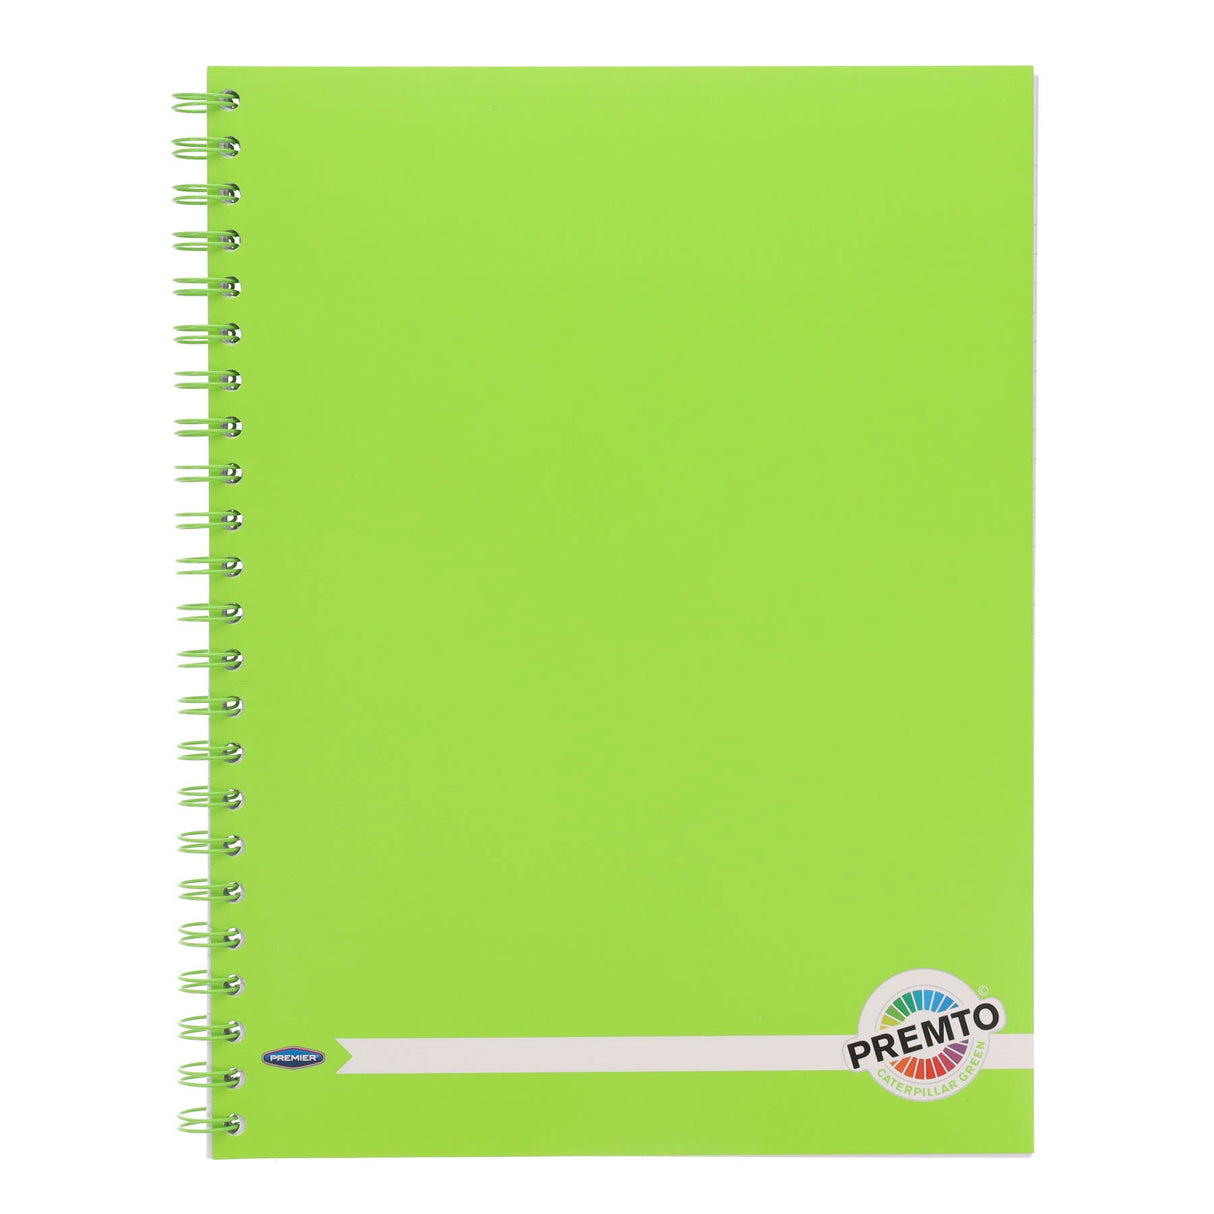 Premto A4 Wiro Notebook - 200 Pages - Caterpillar Green-A4 Notebooks-Premto|StationeryShop.co.uk